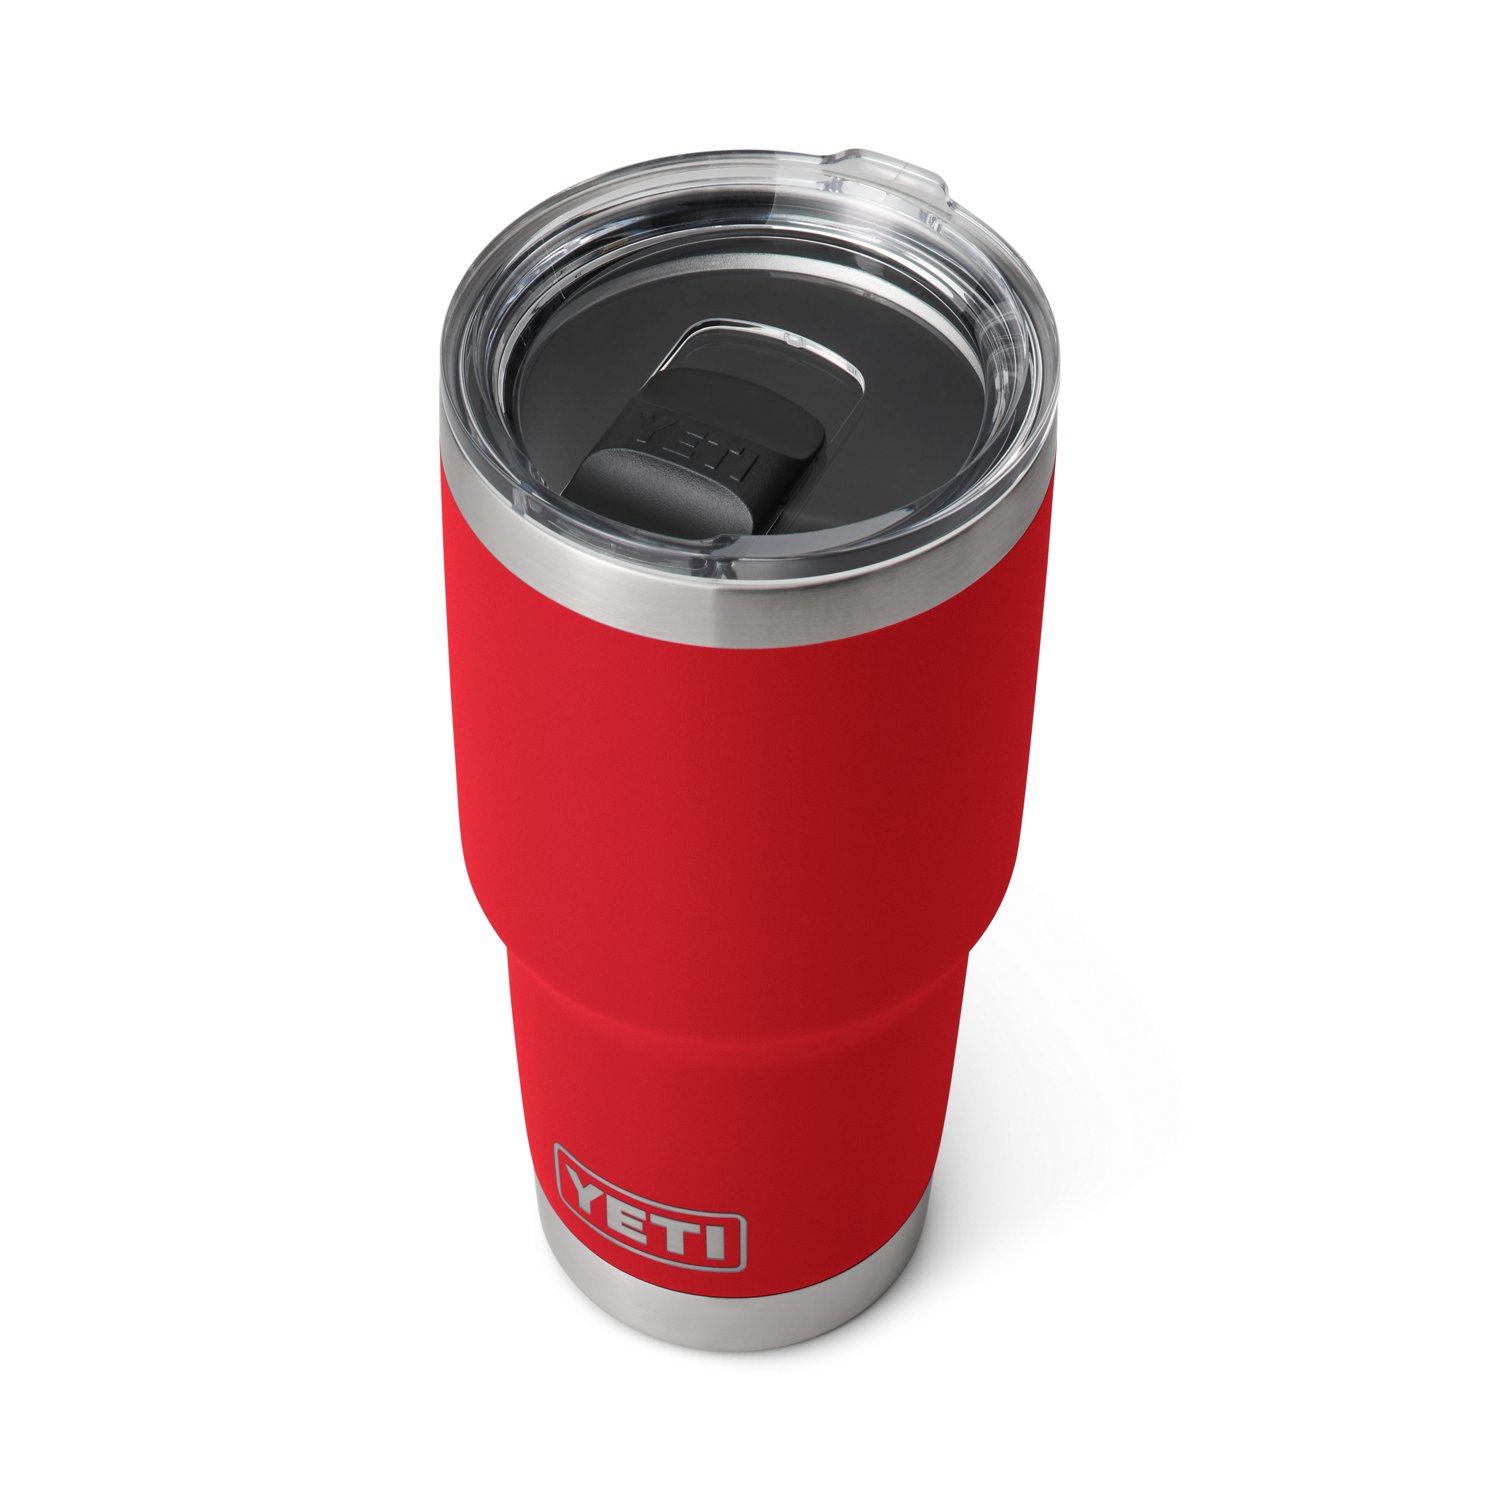 https://academy.scene7.com/is/image/academy//drinkware/yeti-duracoat-rambler-30-oz-tumbler-21071501391-red/bdf2a343f96c4744948651fbae72bb53?$pdp-mobile-gallery-ng$